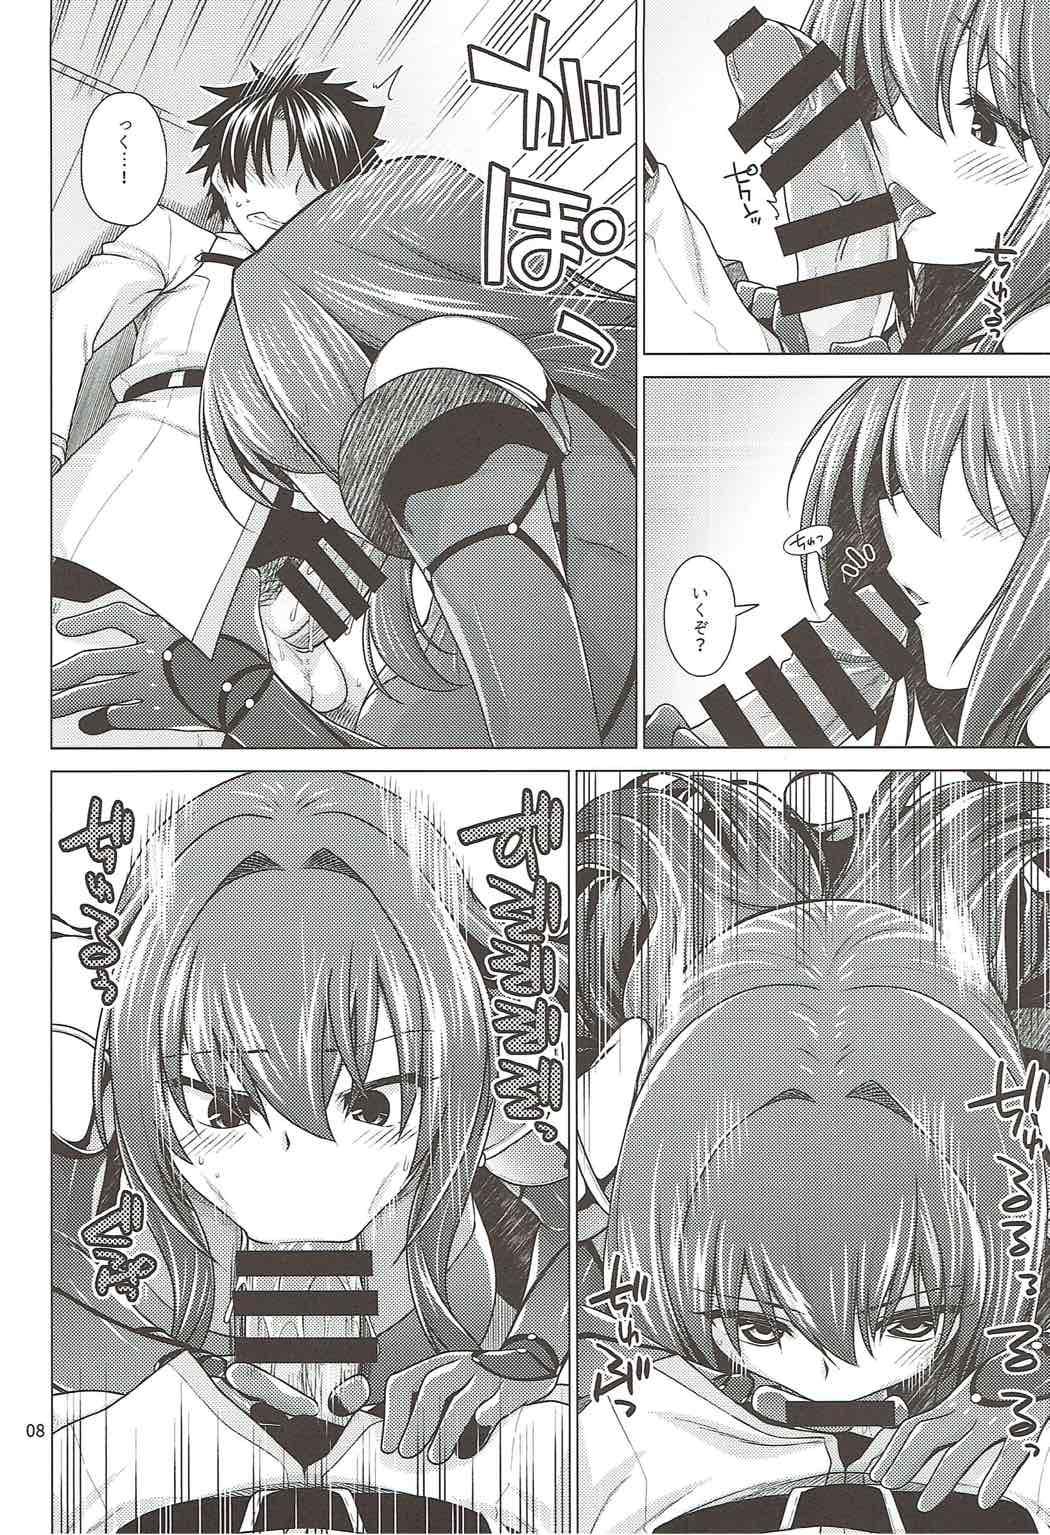 Doggy Style Porn Scathach Shishou to Celt Shiki Gachihamex! - Fate grand order  - Page 7